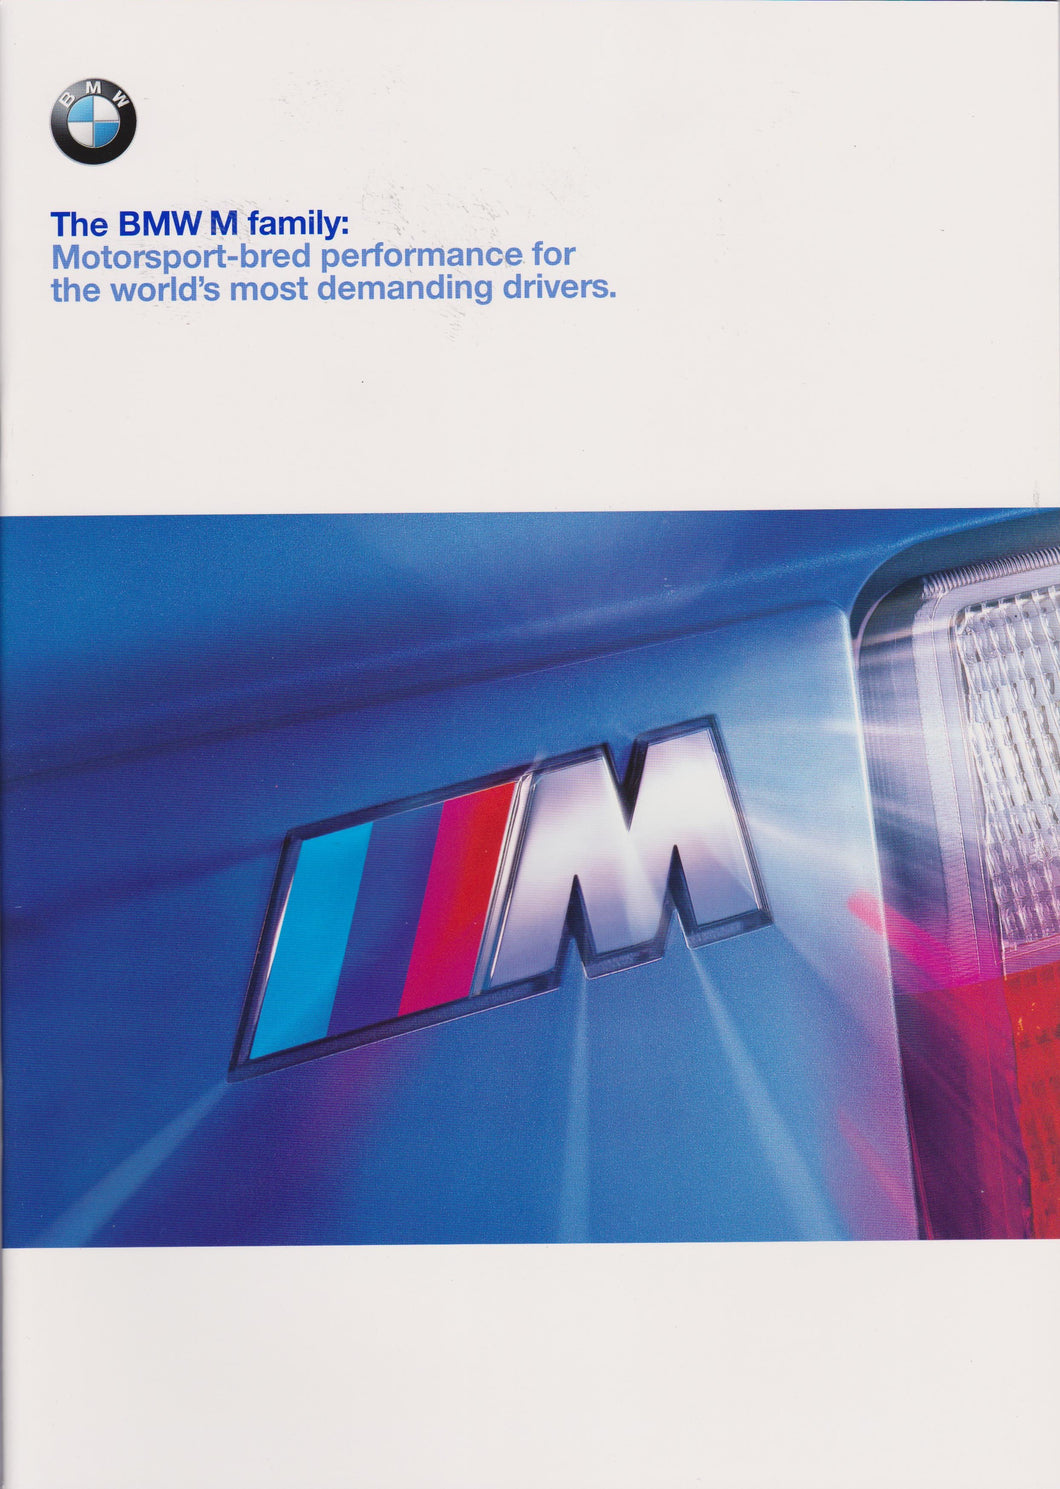 Brochure - The BMW M family: Motorsport-bred performance for the world's most demanding drivers. (1999)